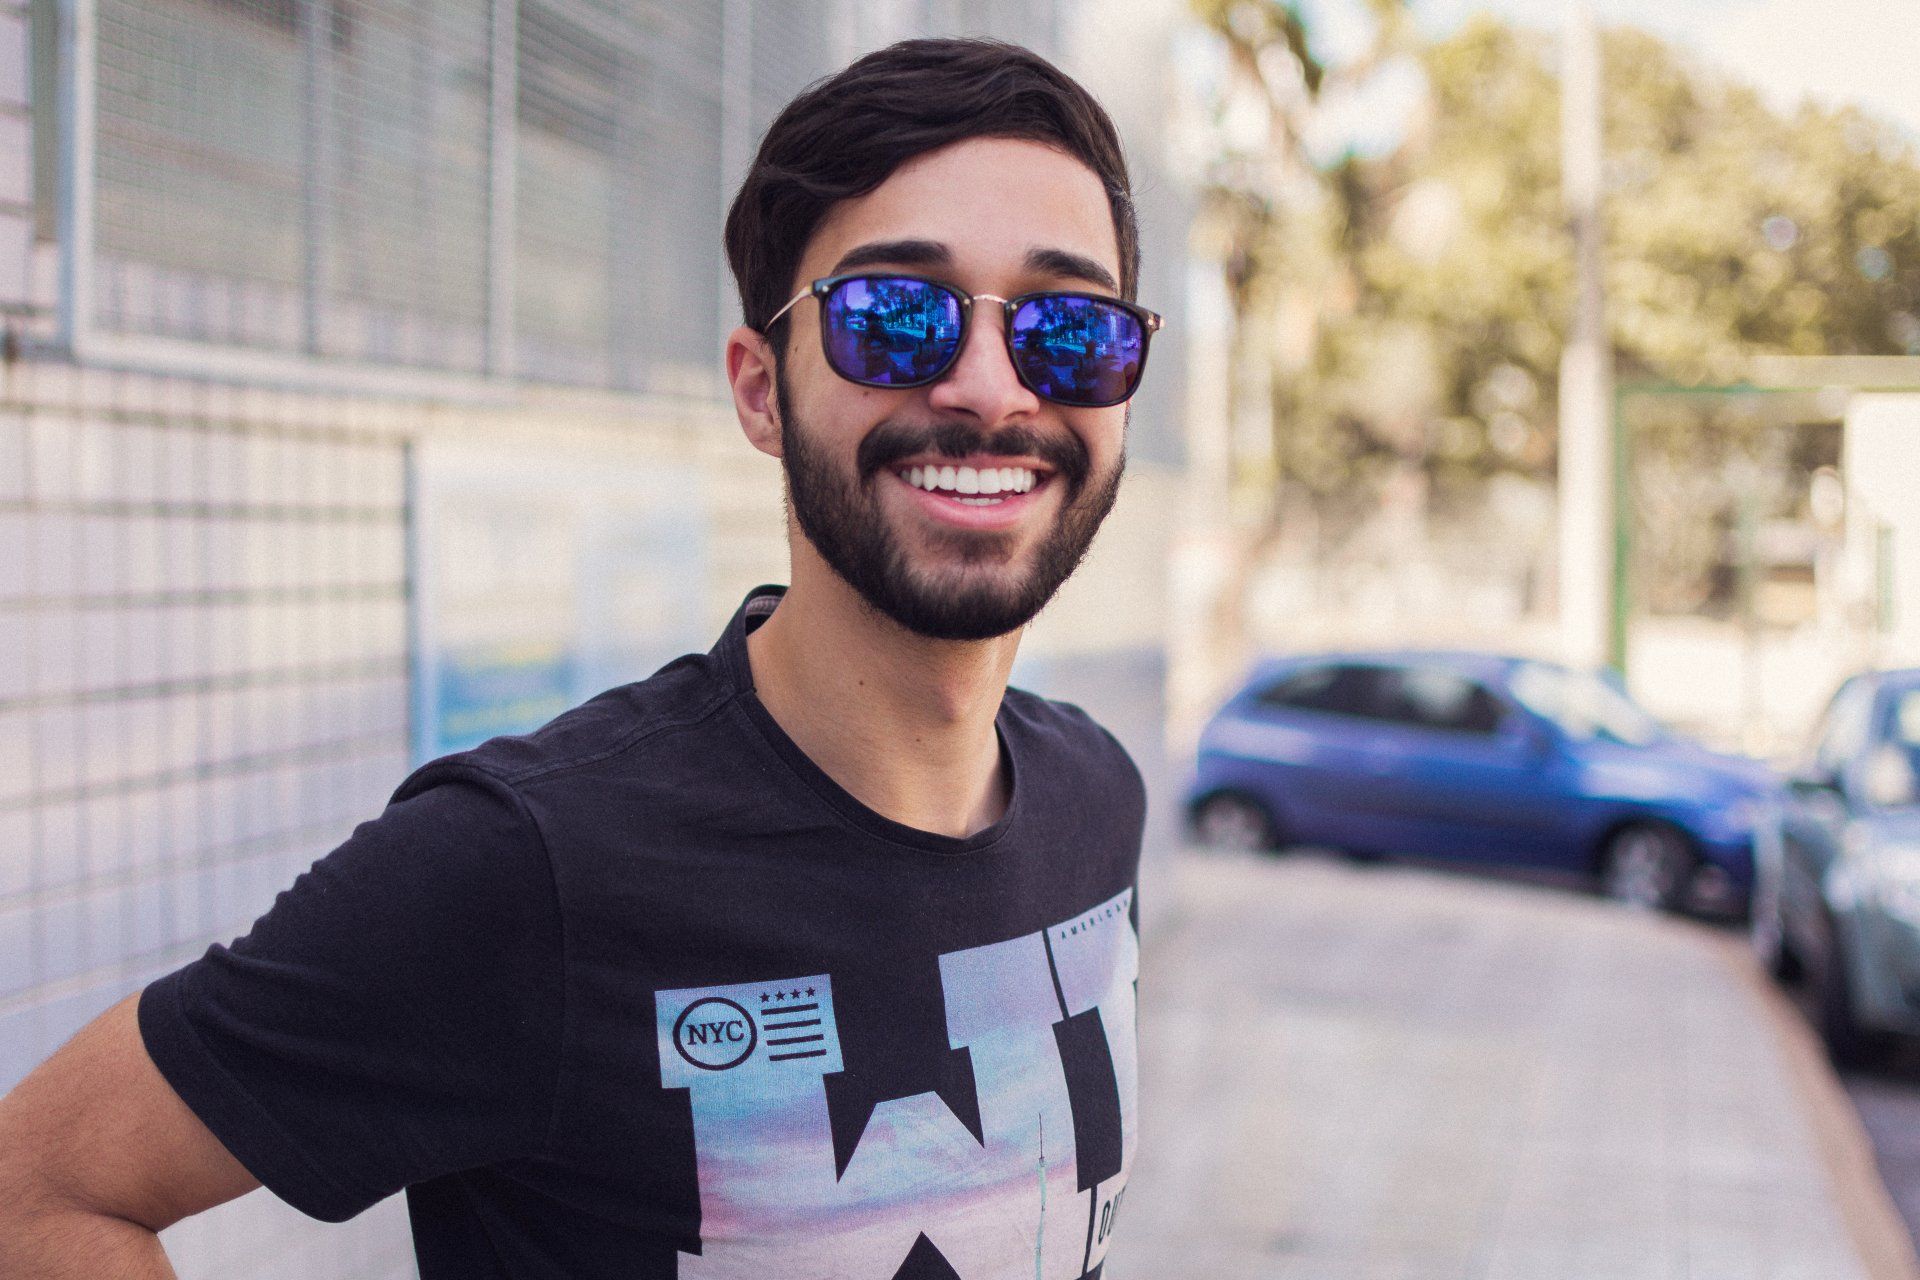 A man with a beard wearing sunglasses and a black shirt is smiling.